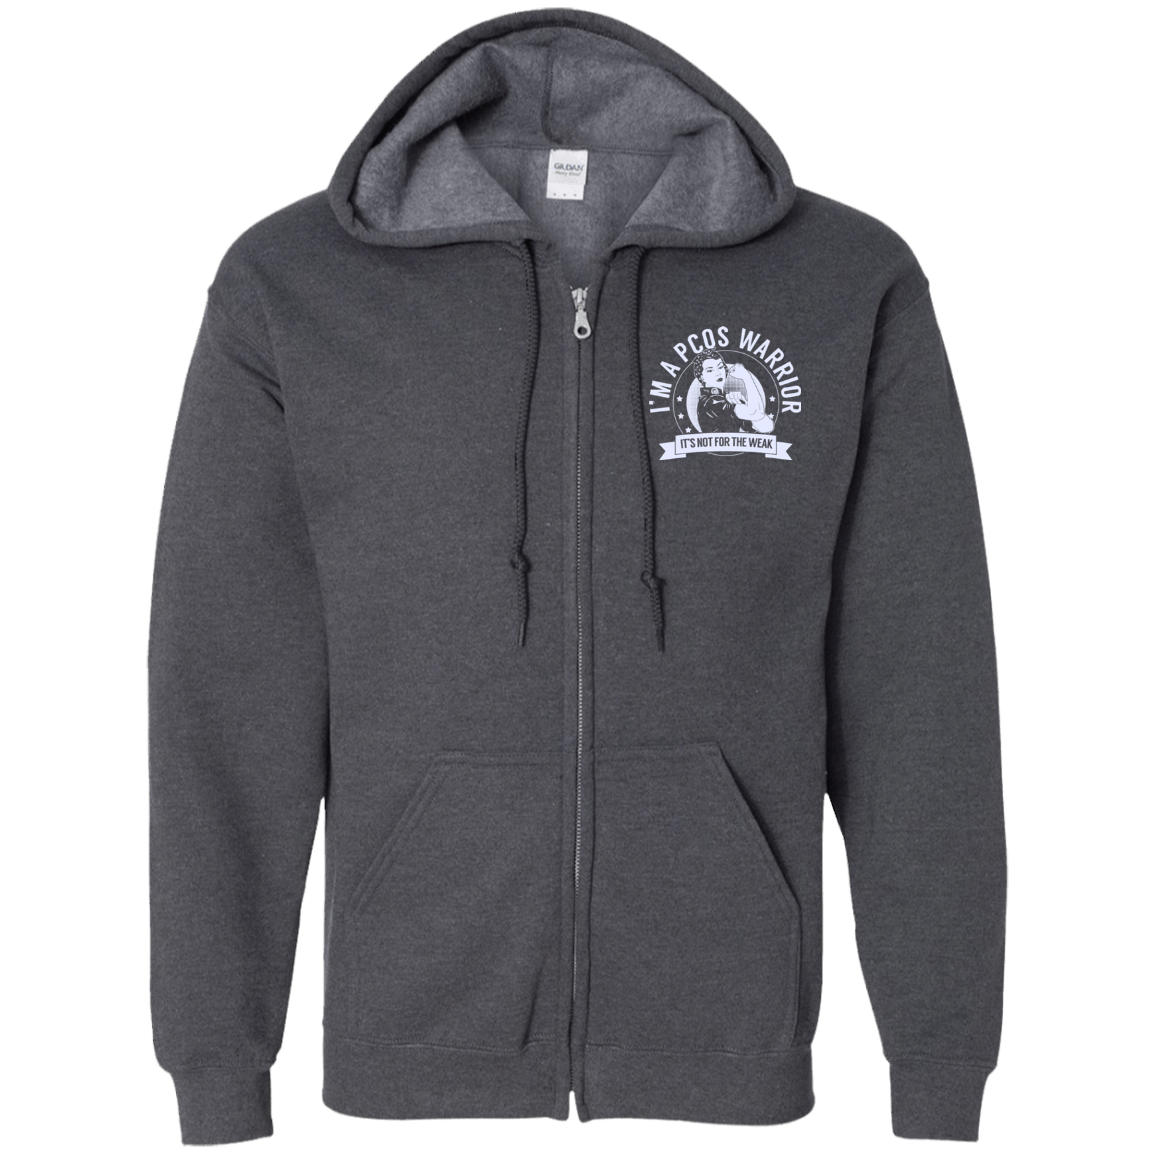 Polycystic Ovary Syndrome - PCOS Warrior NTFW Zip Up Hooded Sweatshirt - The Unchargeables